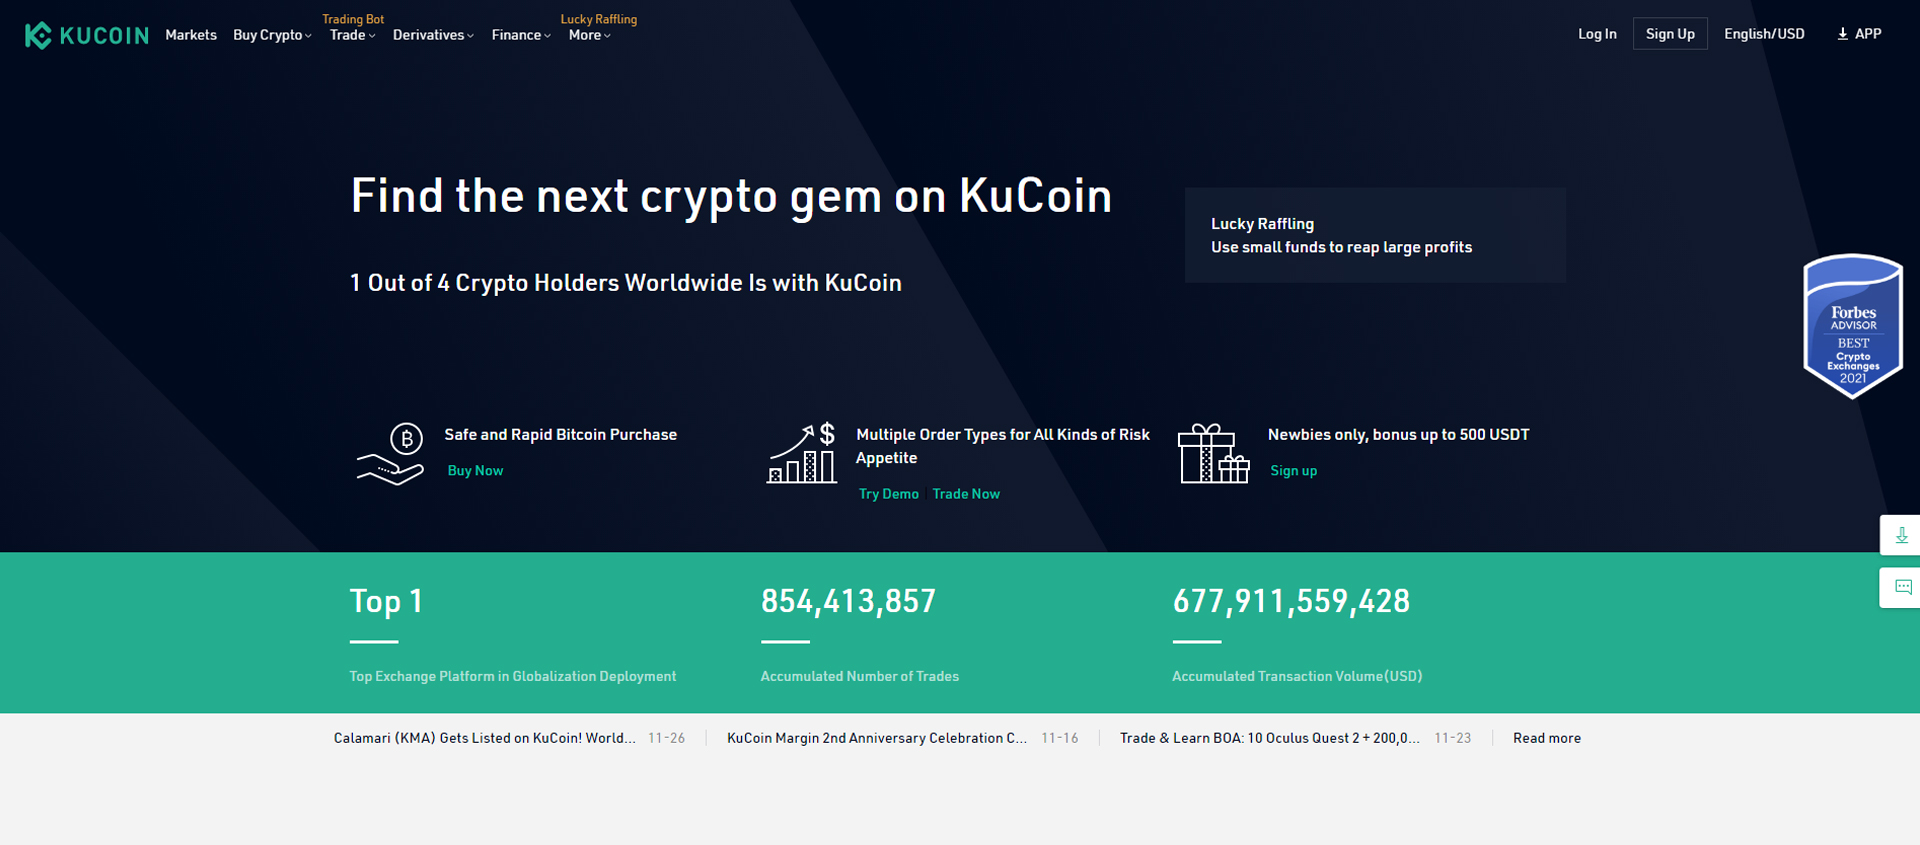 What is the complete KuCoin KYC Verification process for beginners?